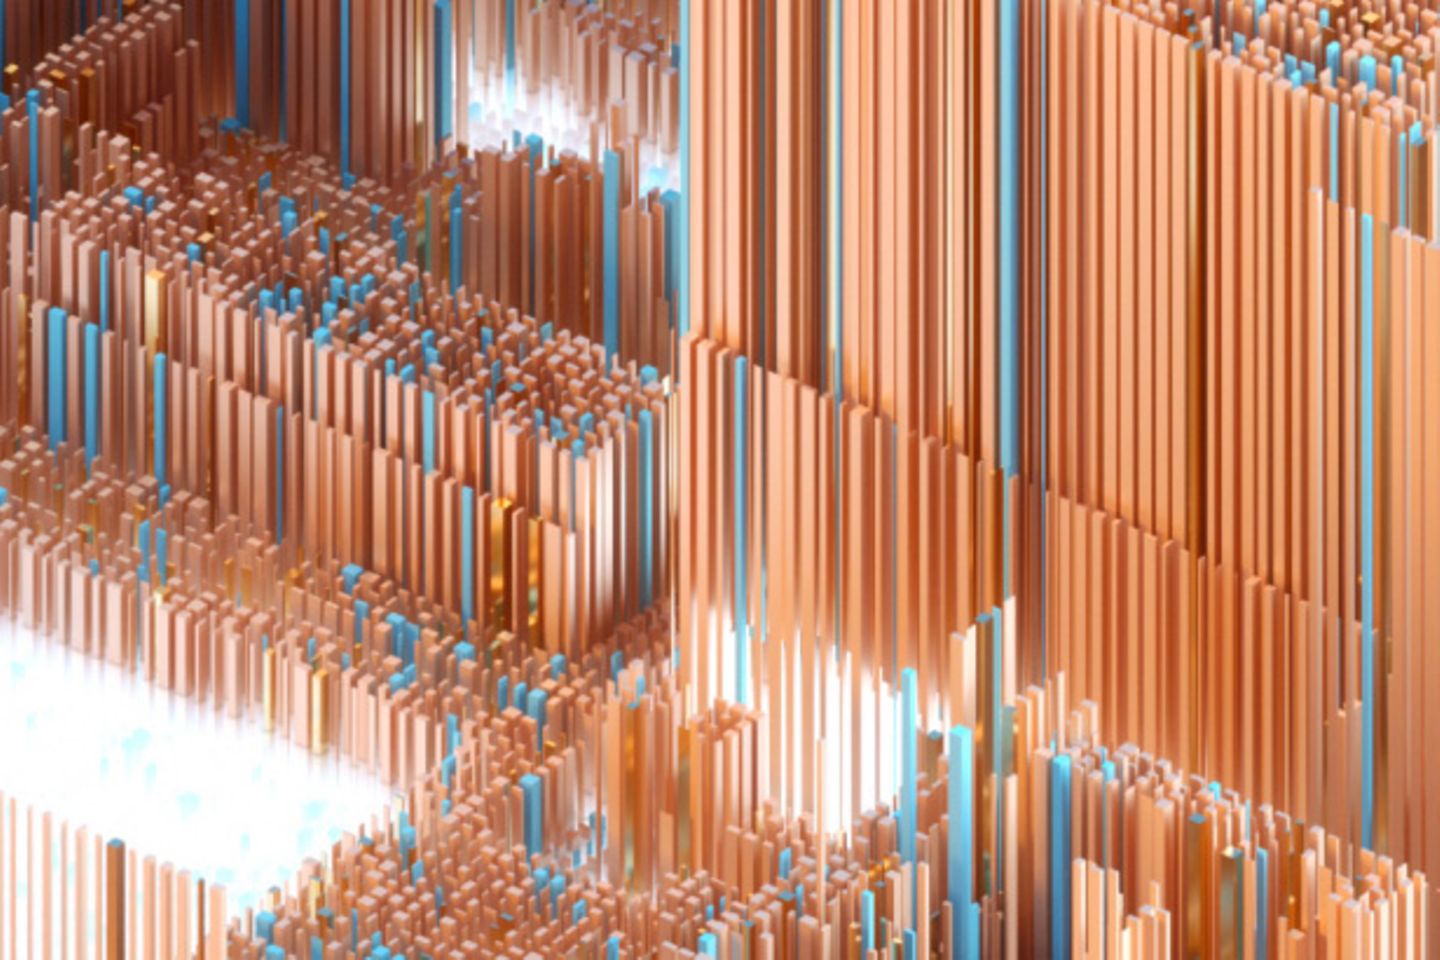 Abstract cityscape made of orange and light blue bars 